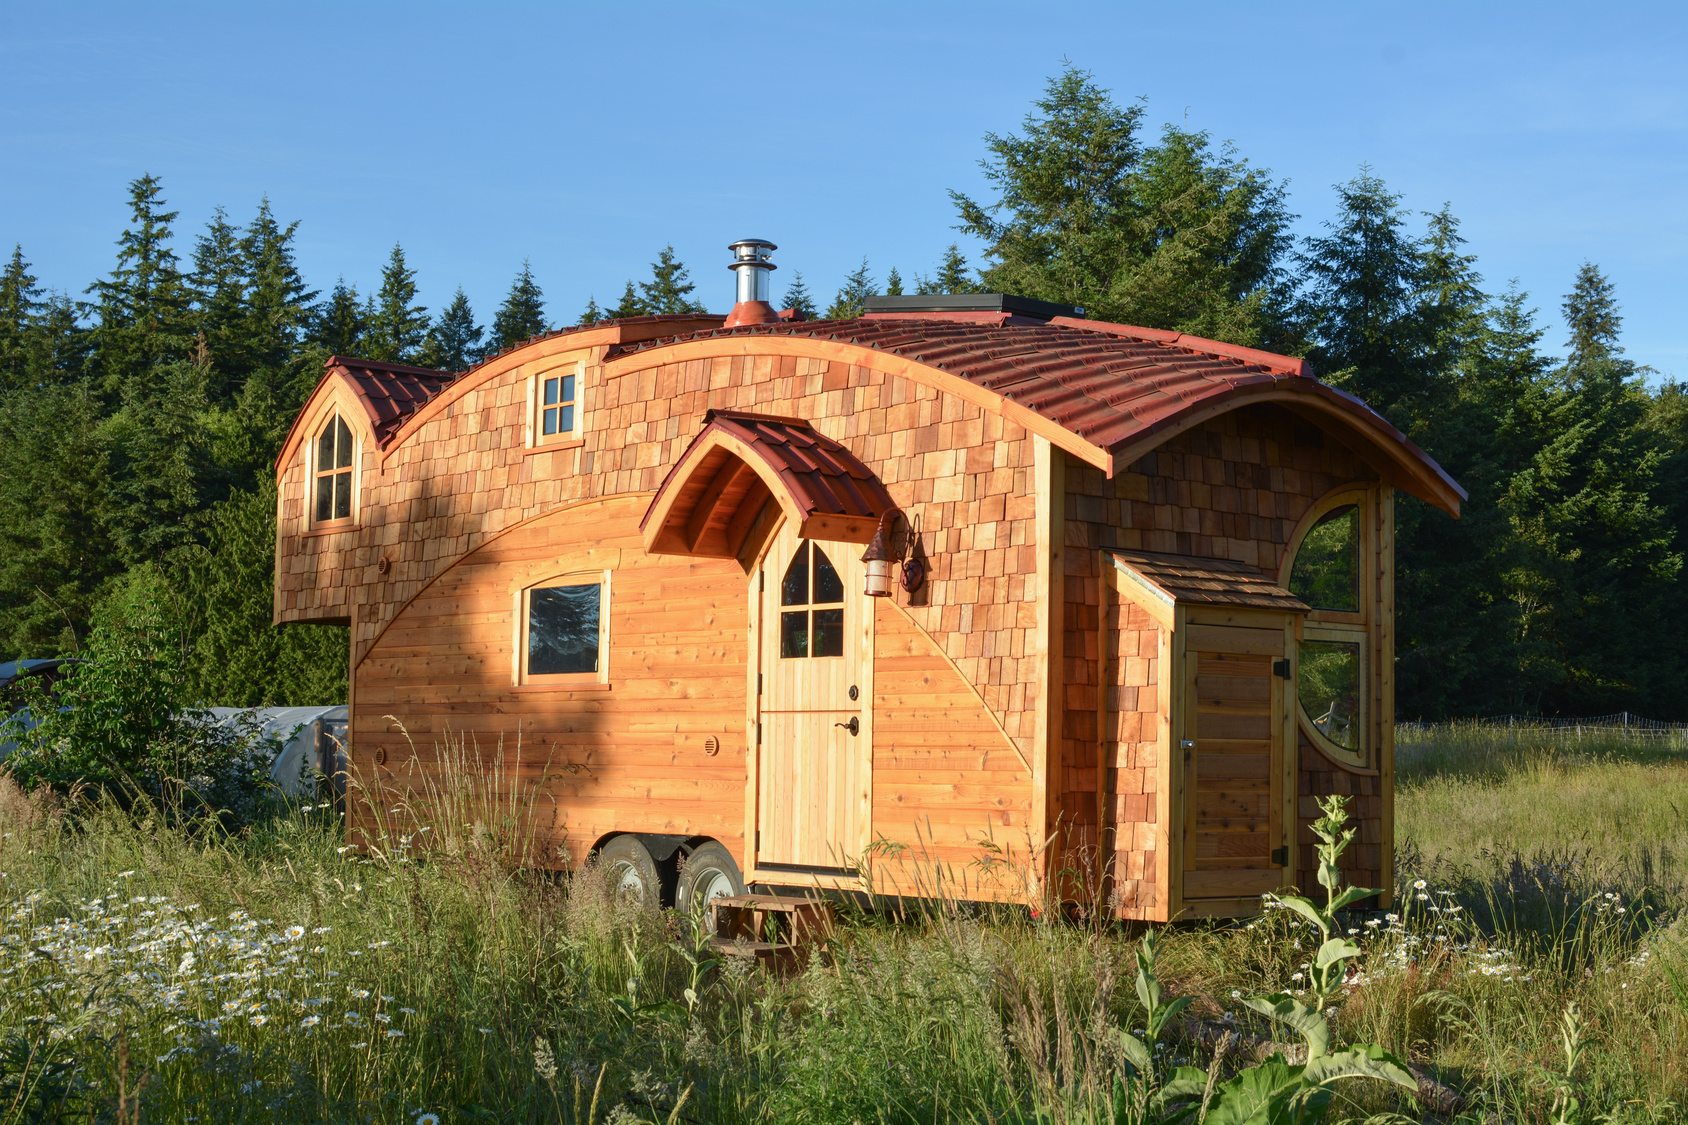 Exploring The Tiny Homes Trend